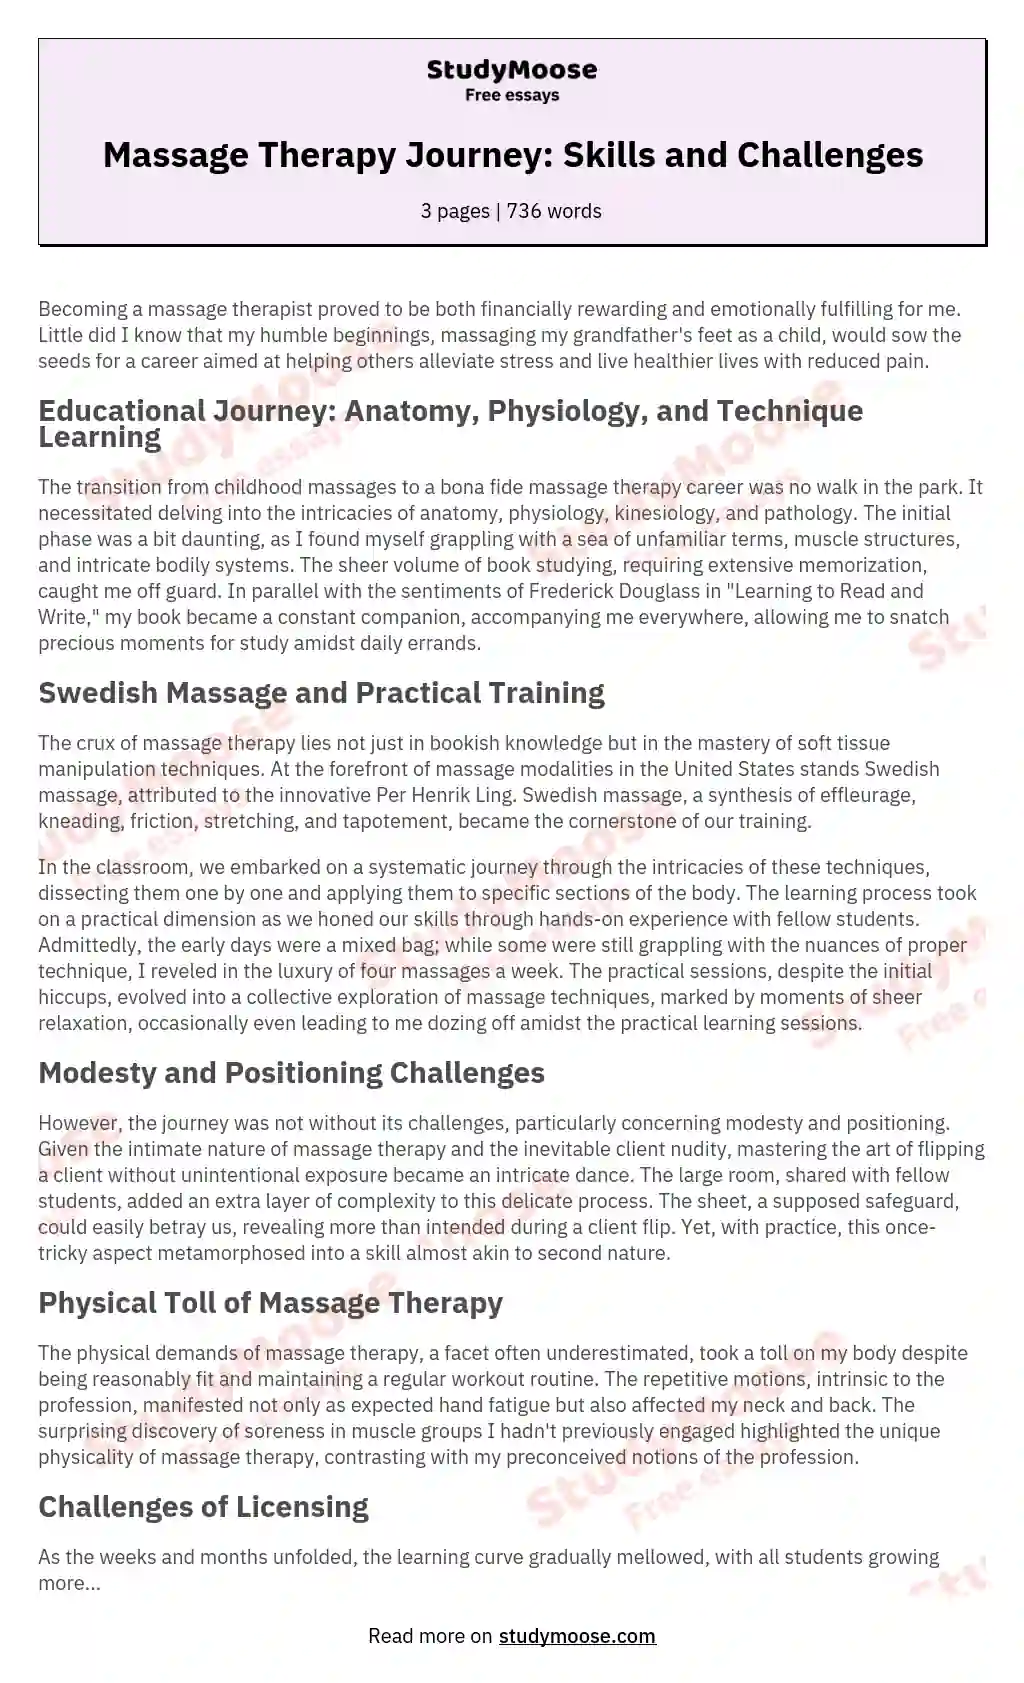 Massage Therapy Journey: Skills and Challenges essay